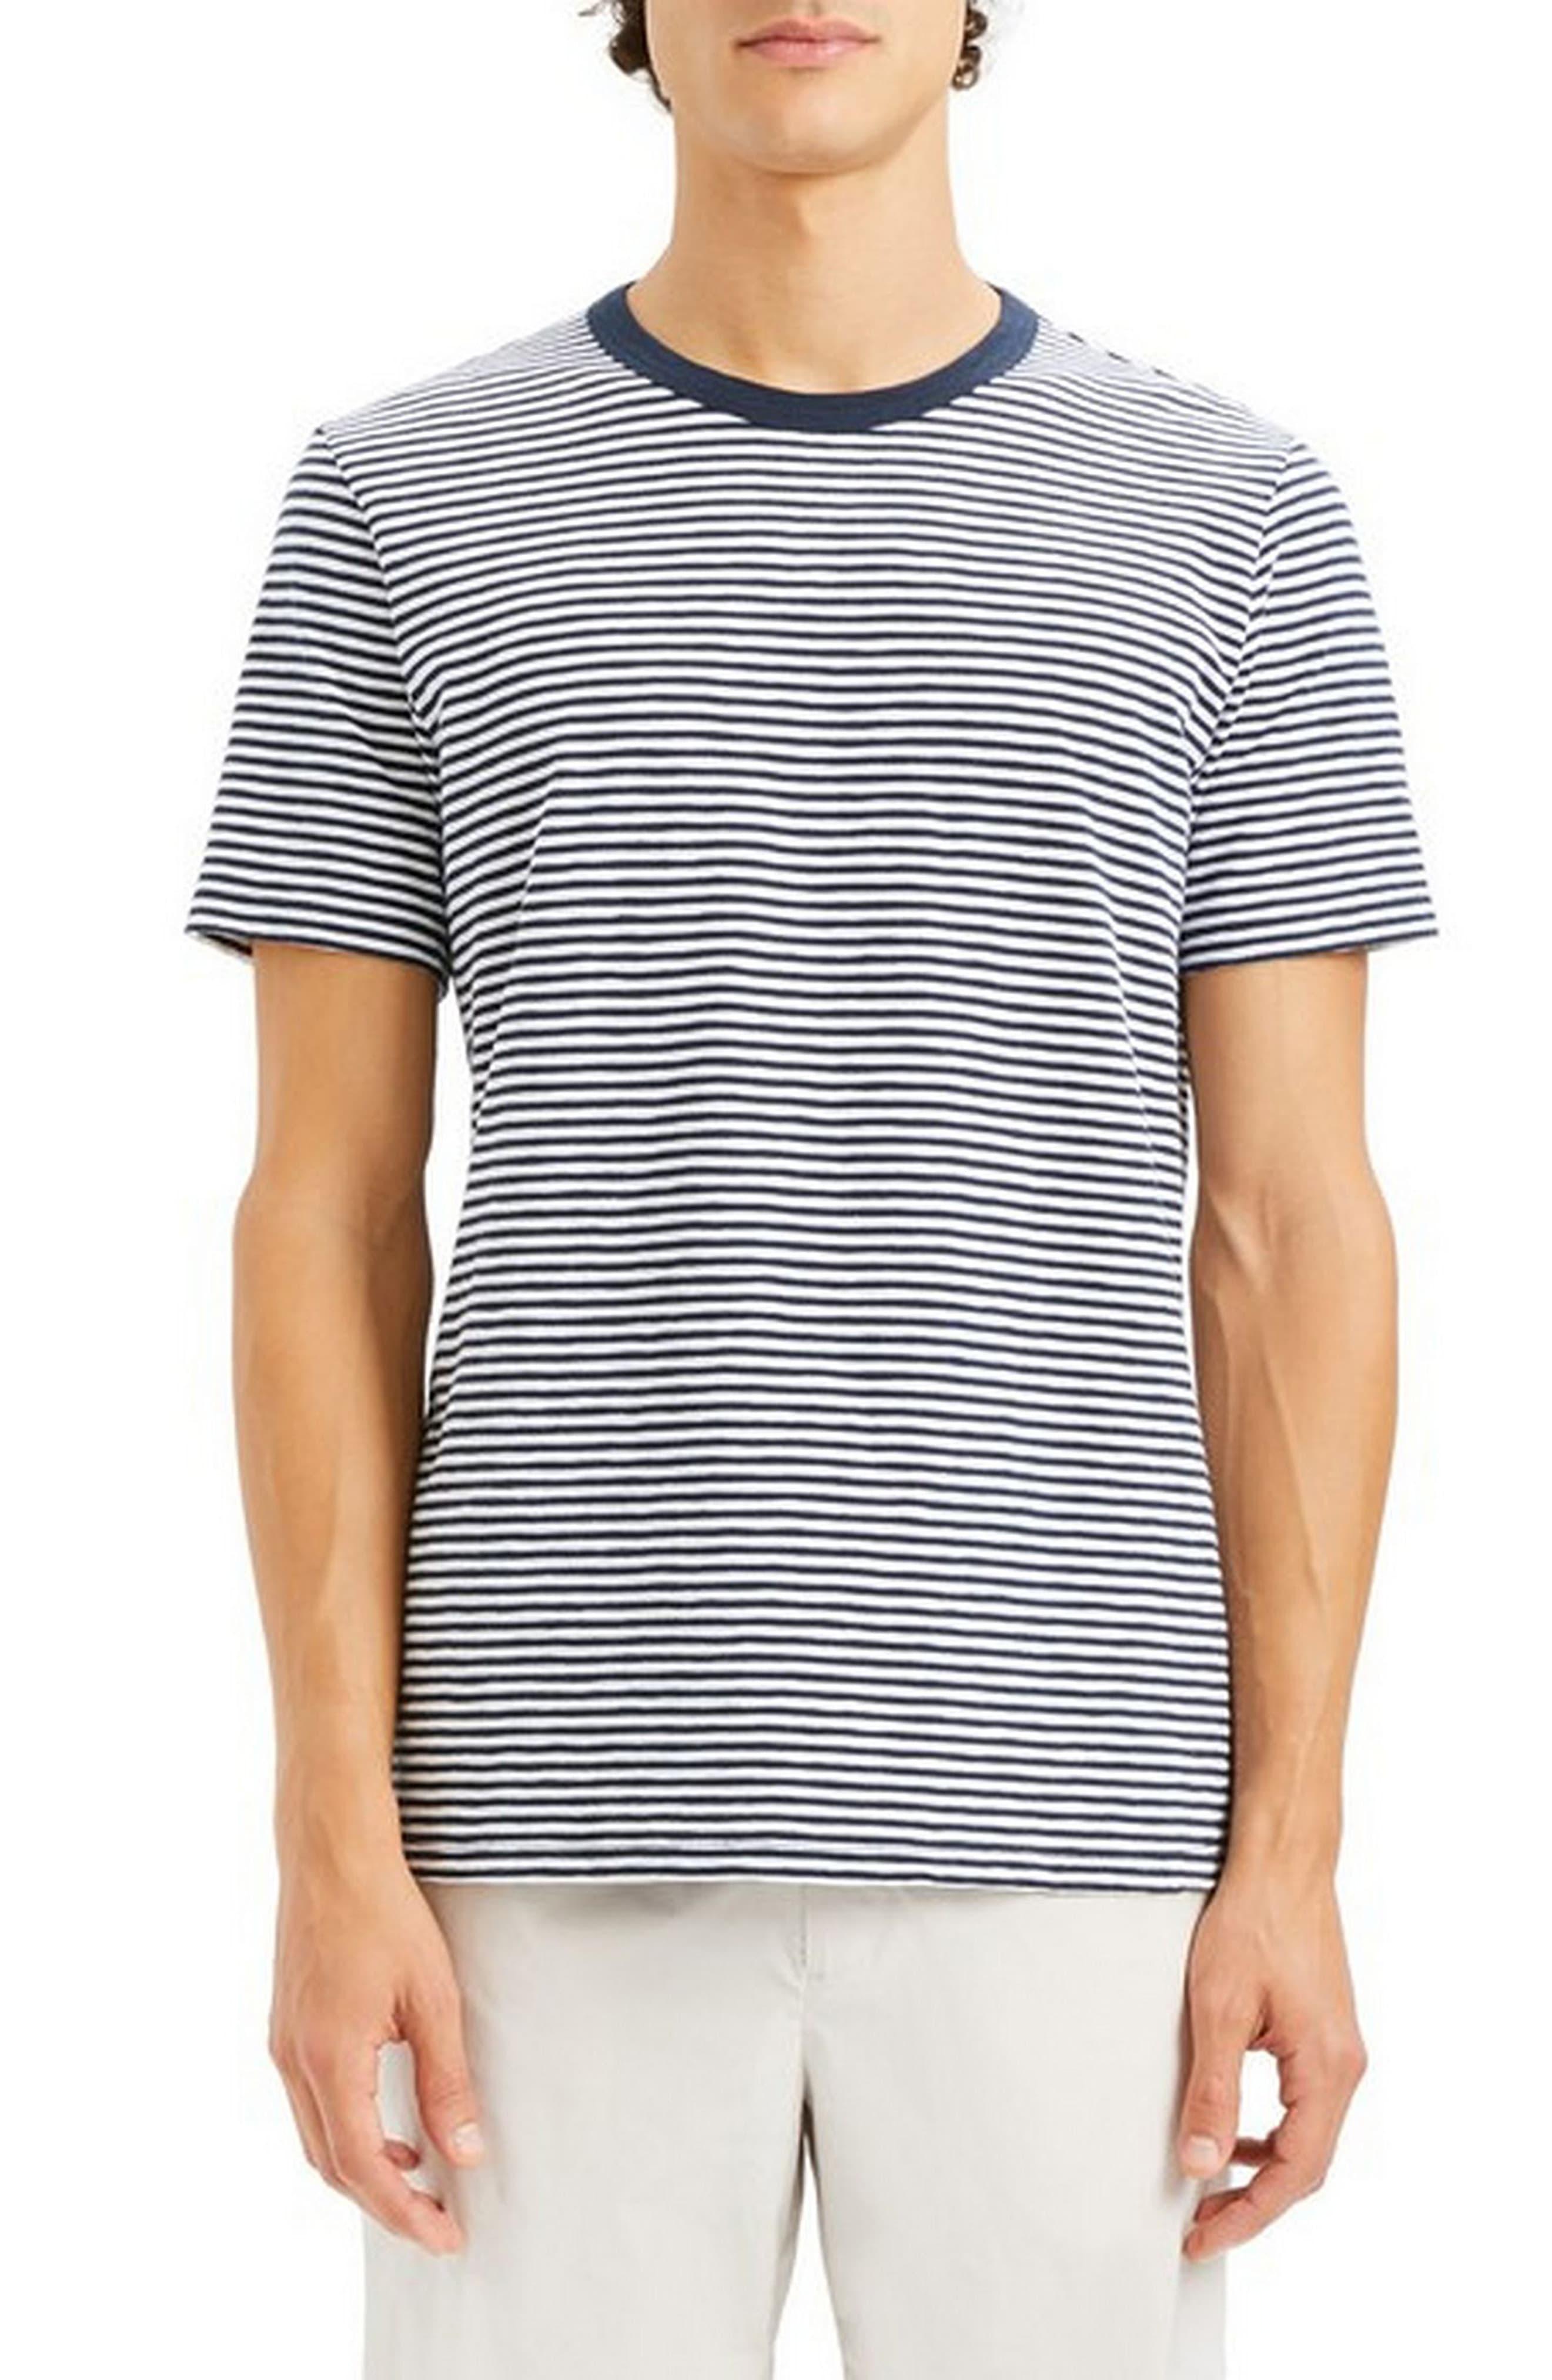 Theory Essential Cosmo1 Stripe T-shirt in White for Men - Lyst